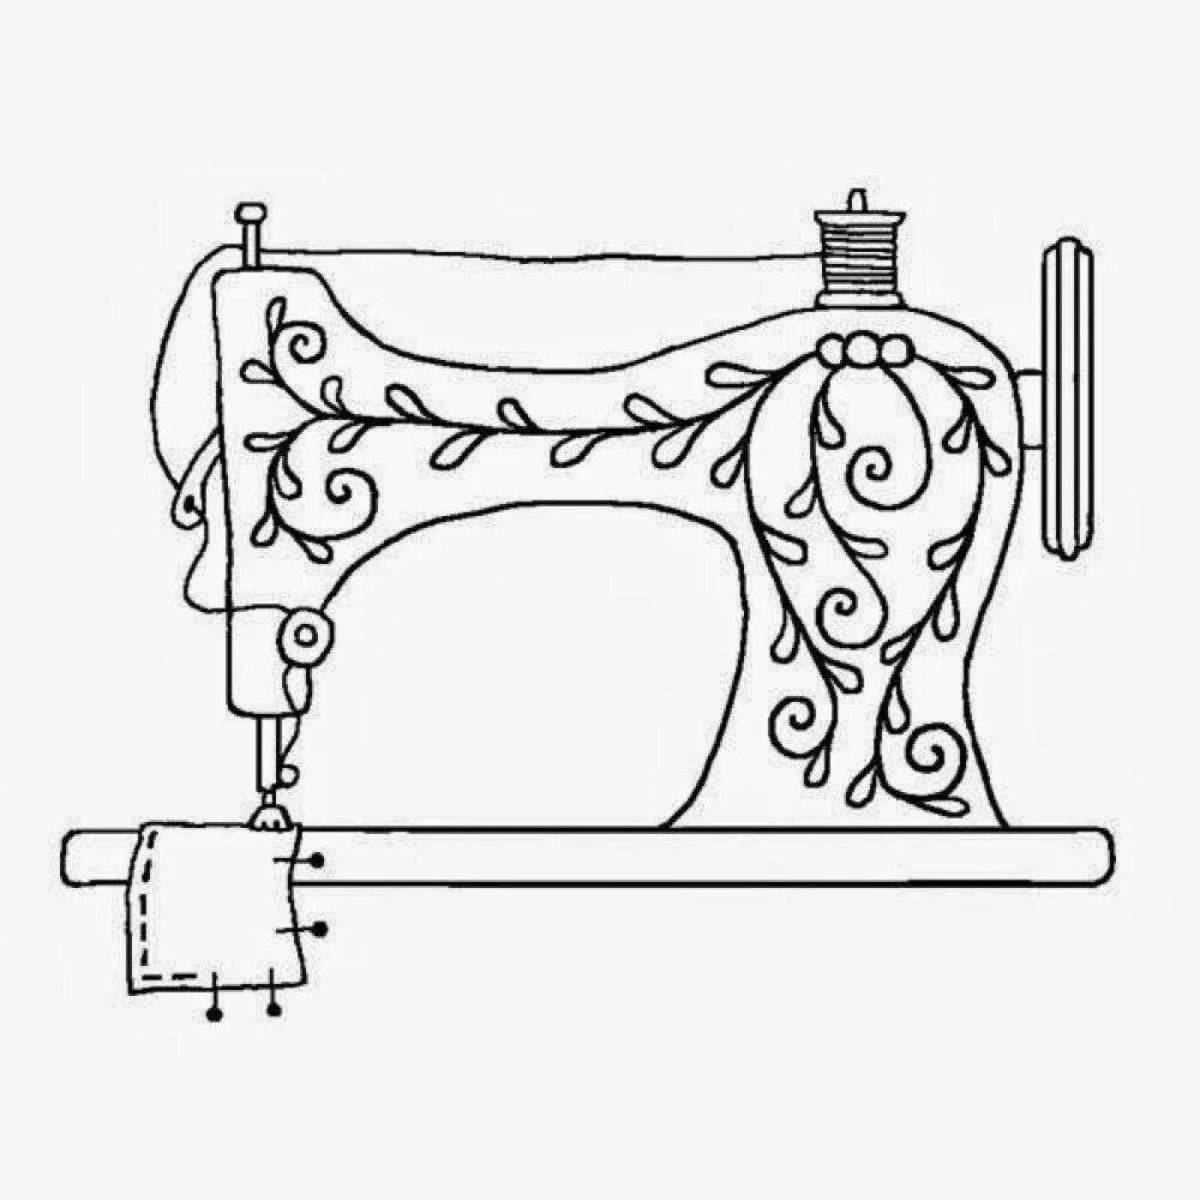 Sewing machine bright coloring page